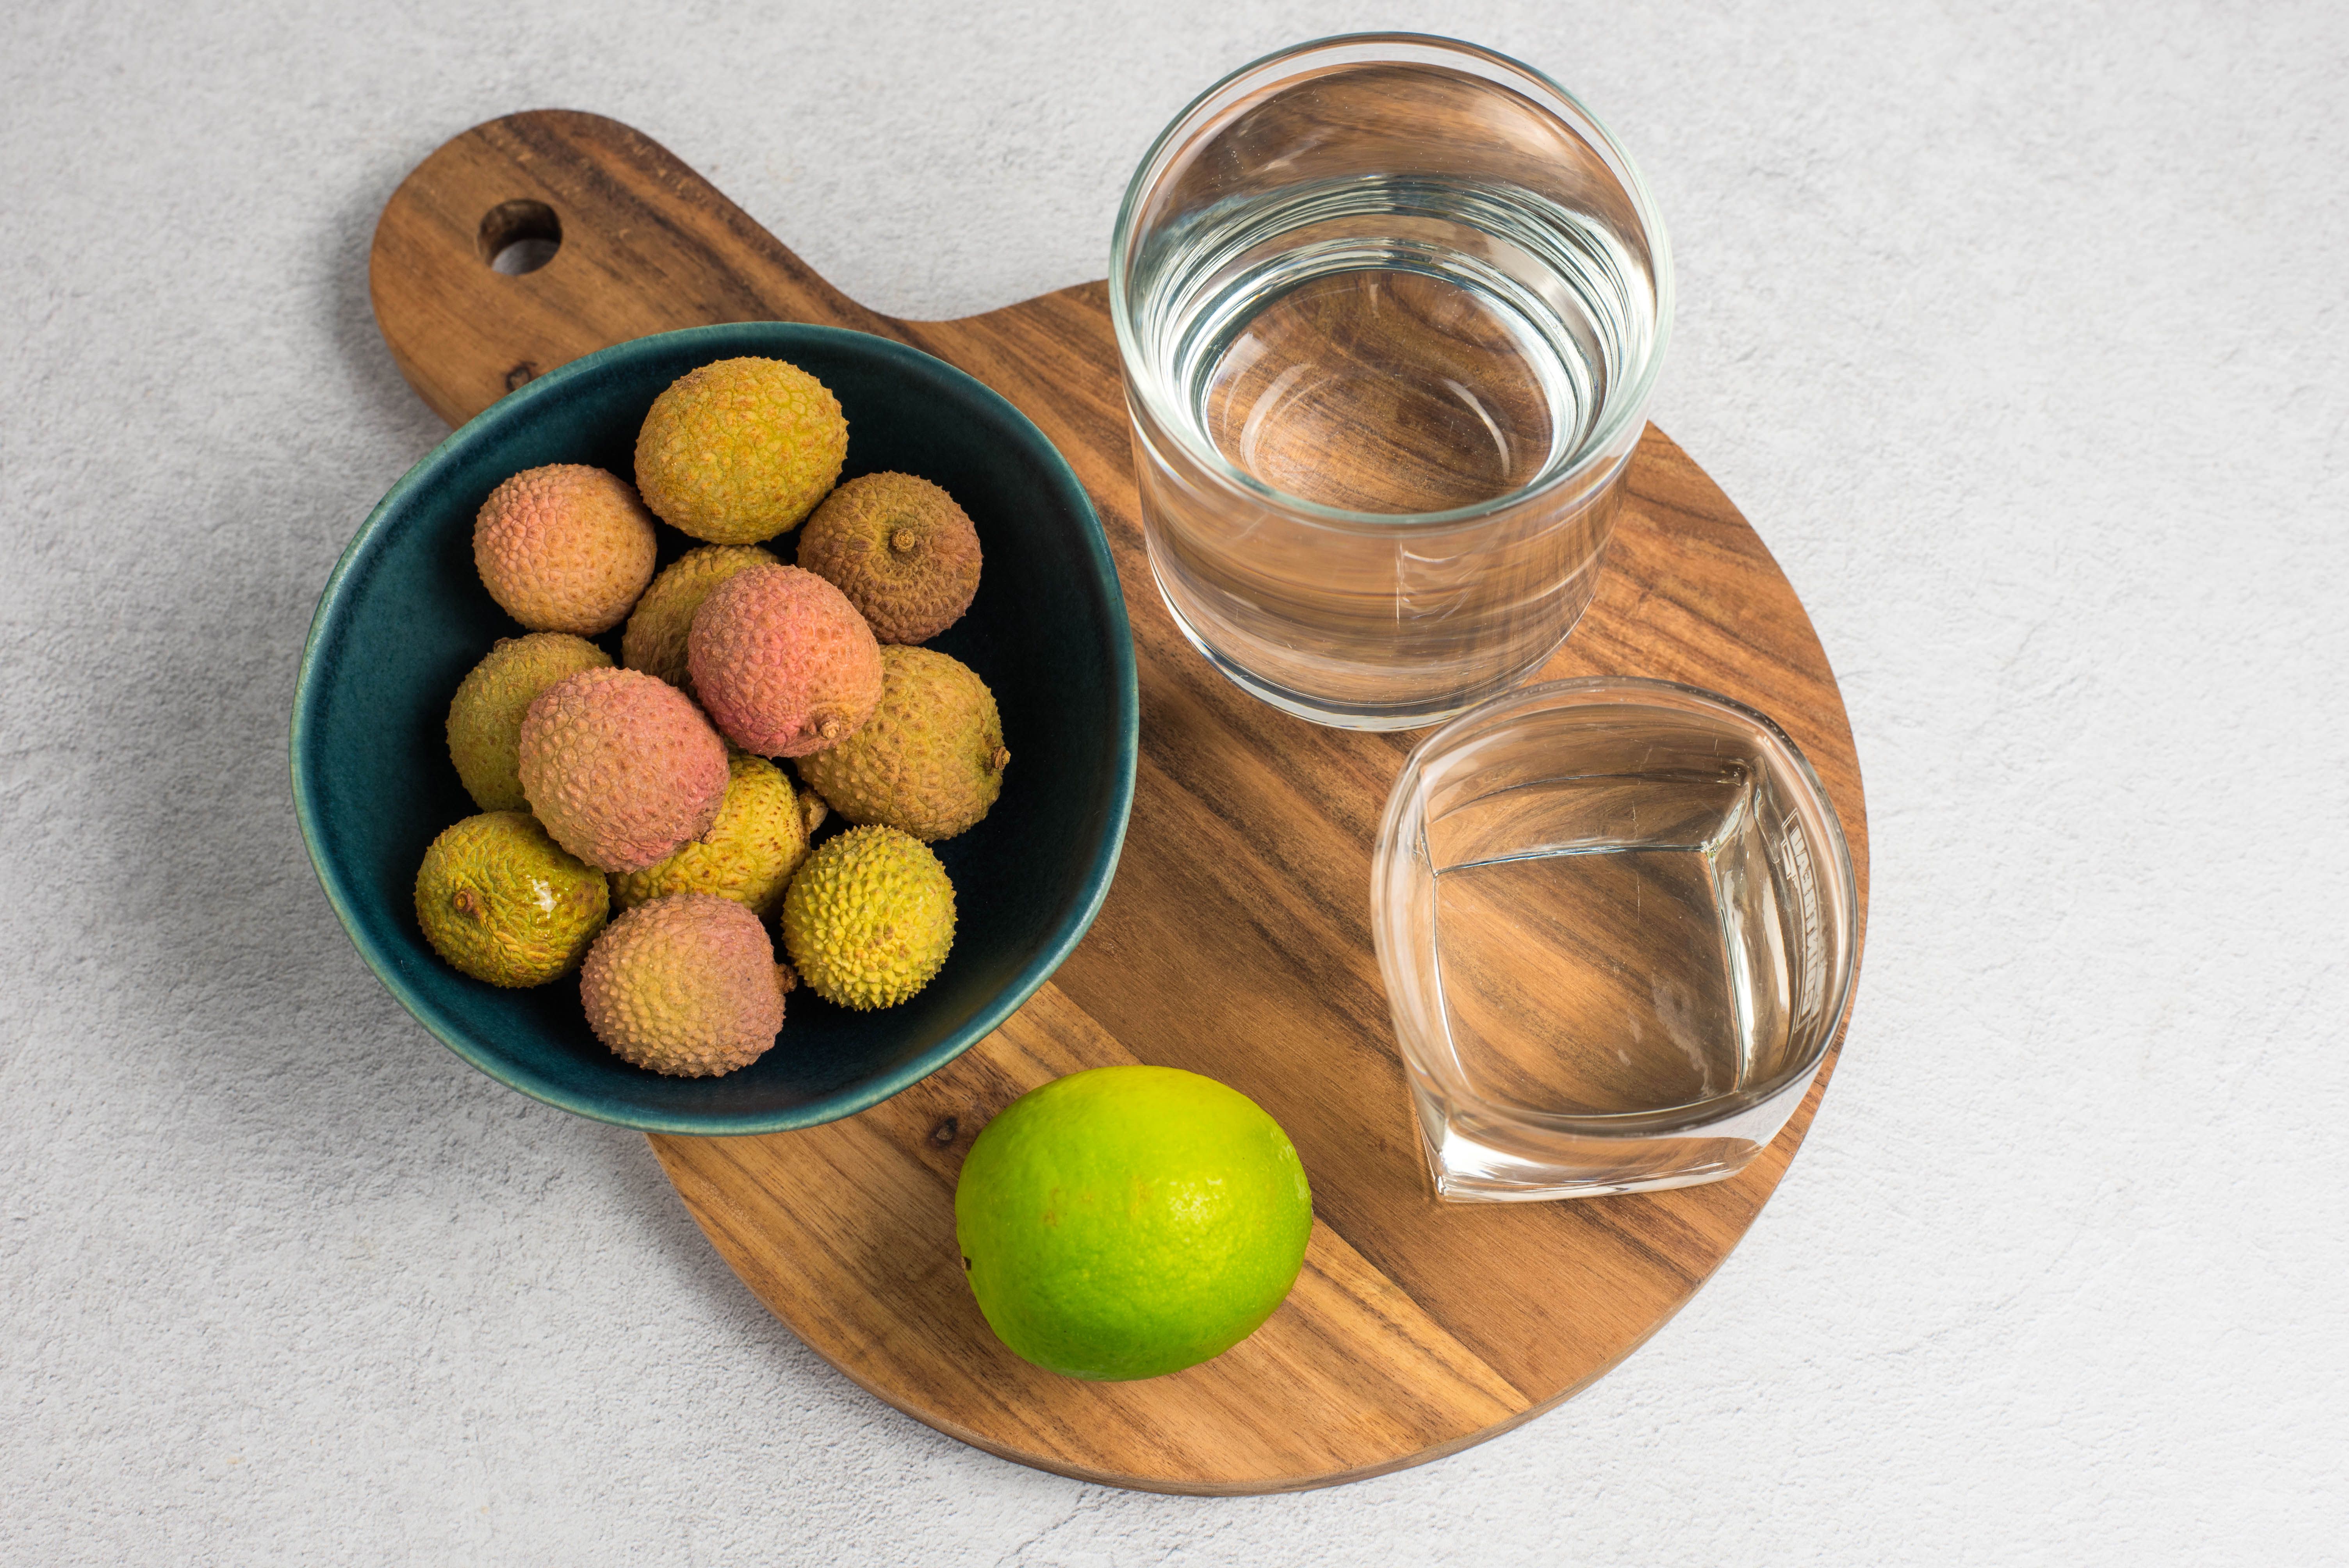 Lychee Martini Recipe With Diy Lychee Liqueur Or Syrup